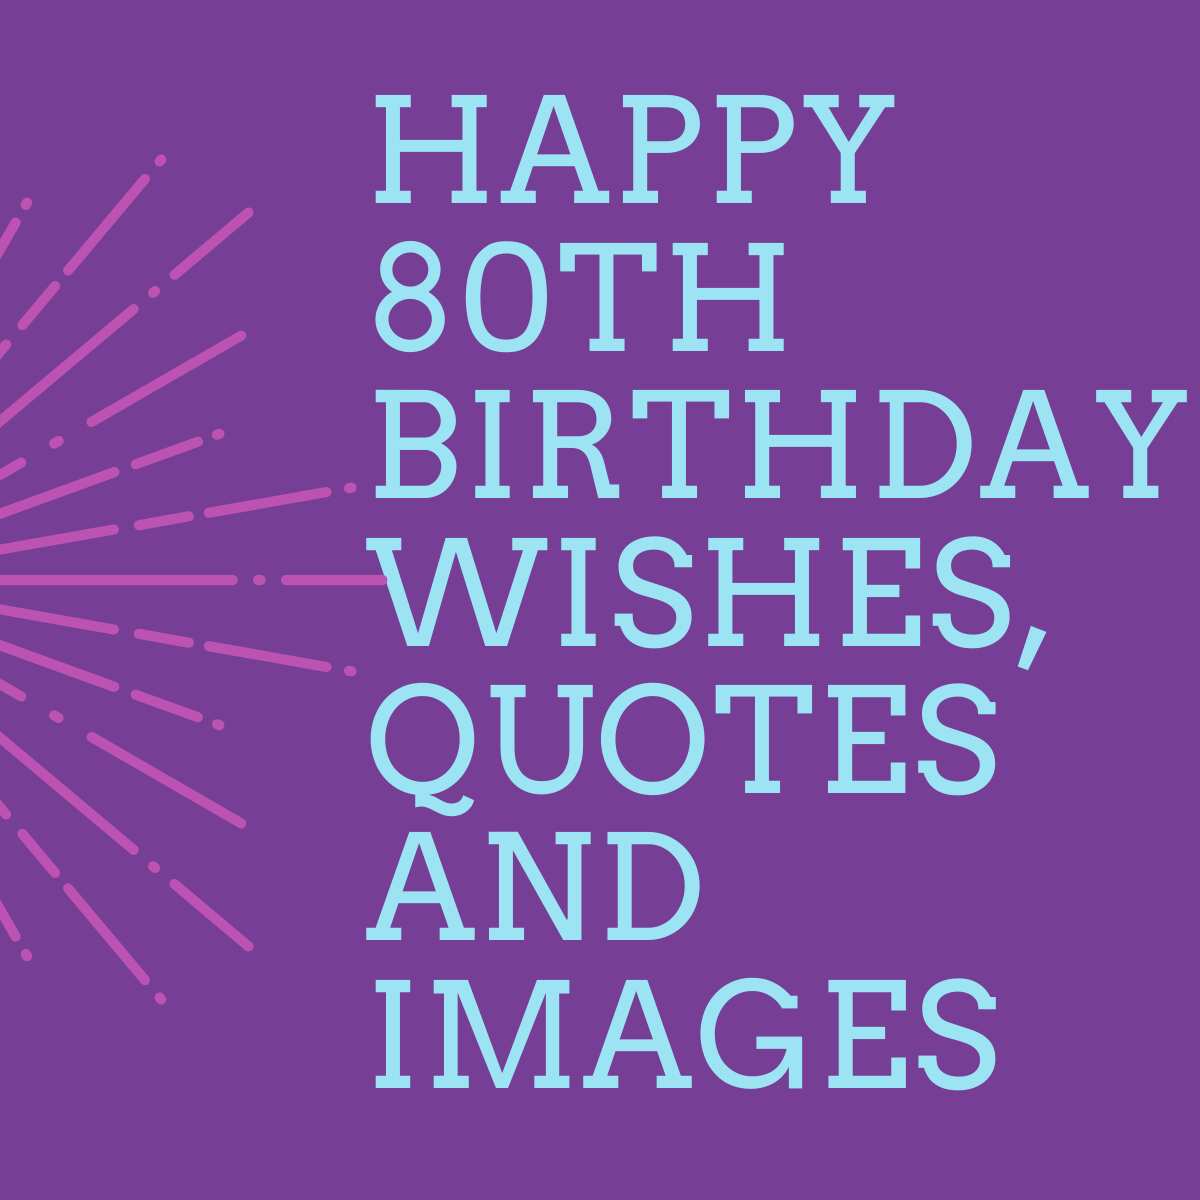 50 Inspiring Happy 80th Birthday Wishes Quotes And Images